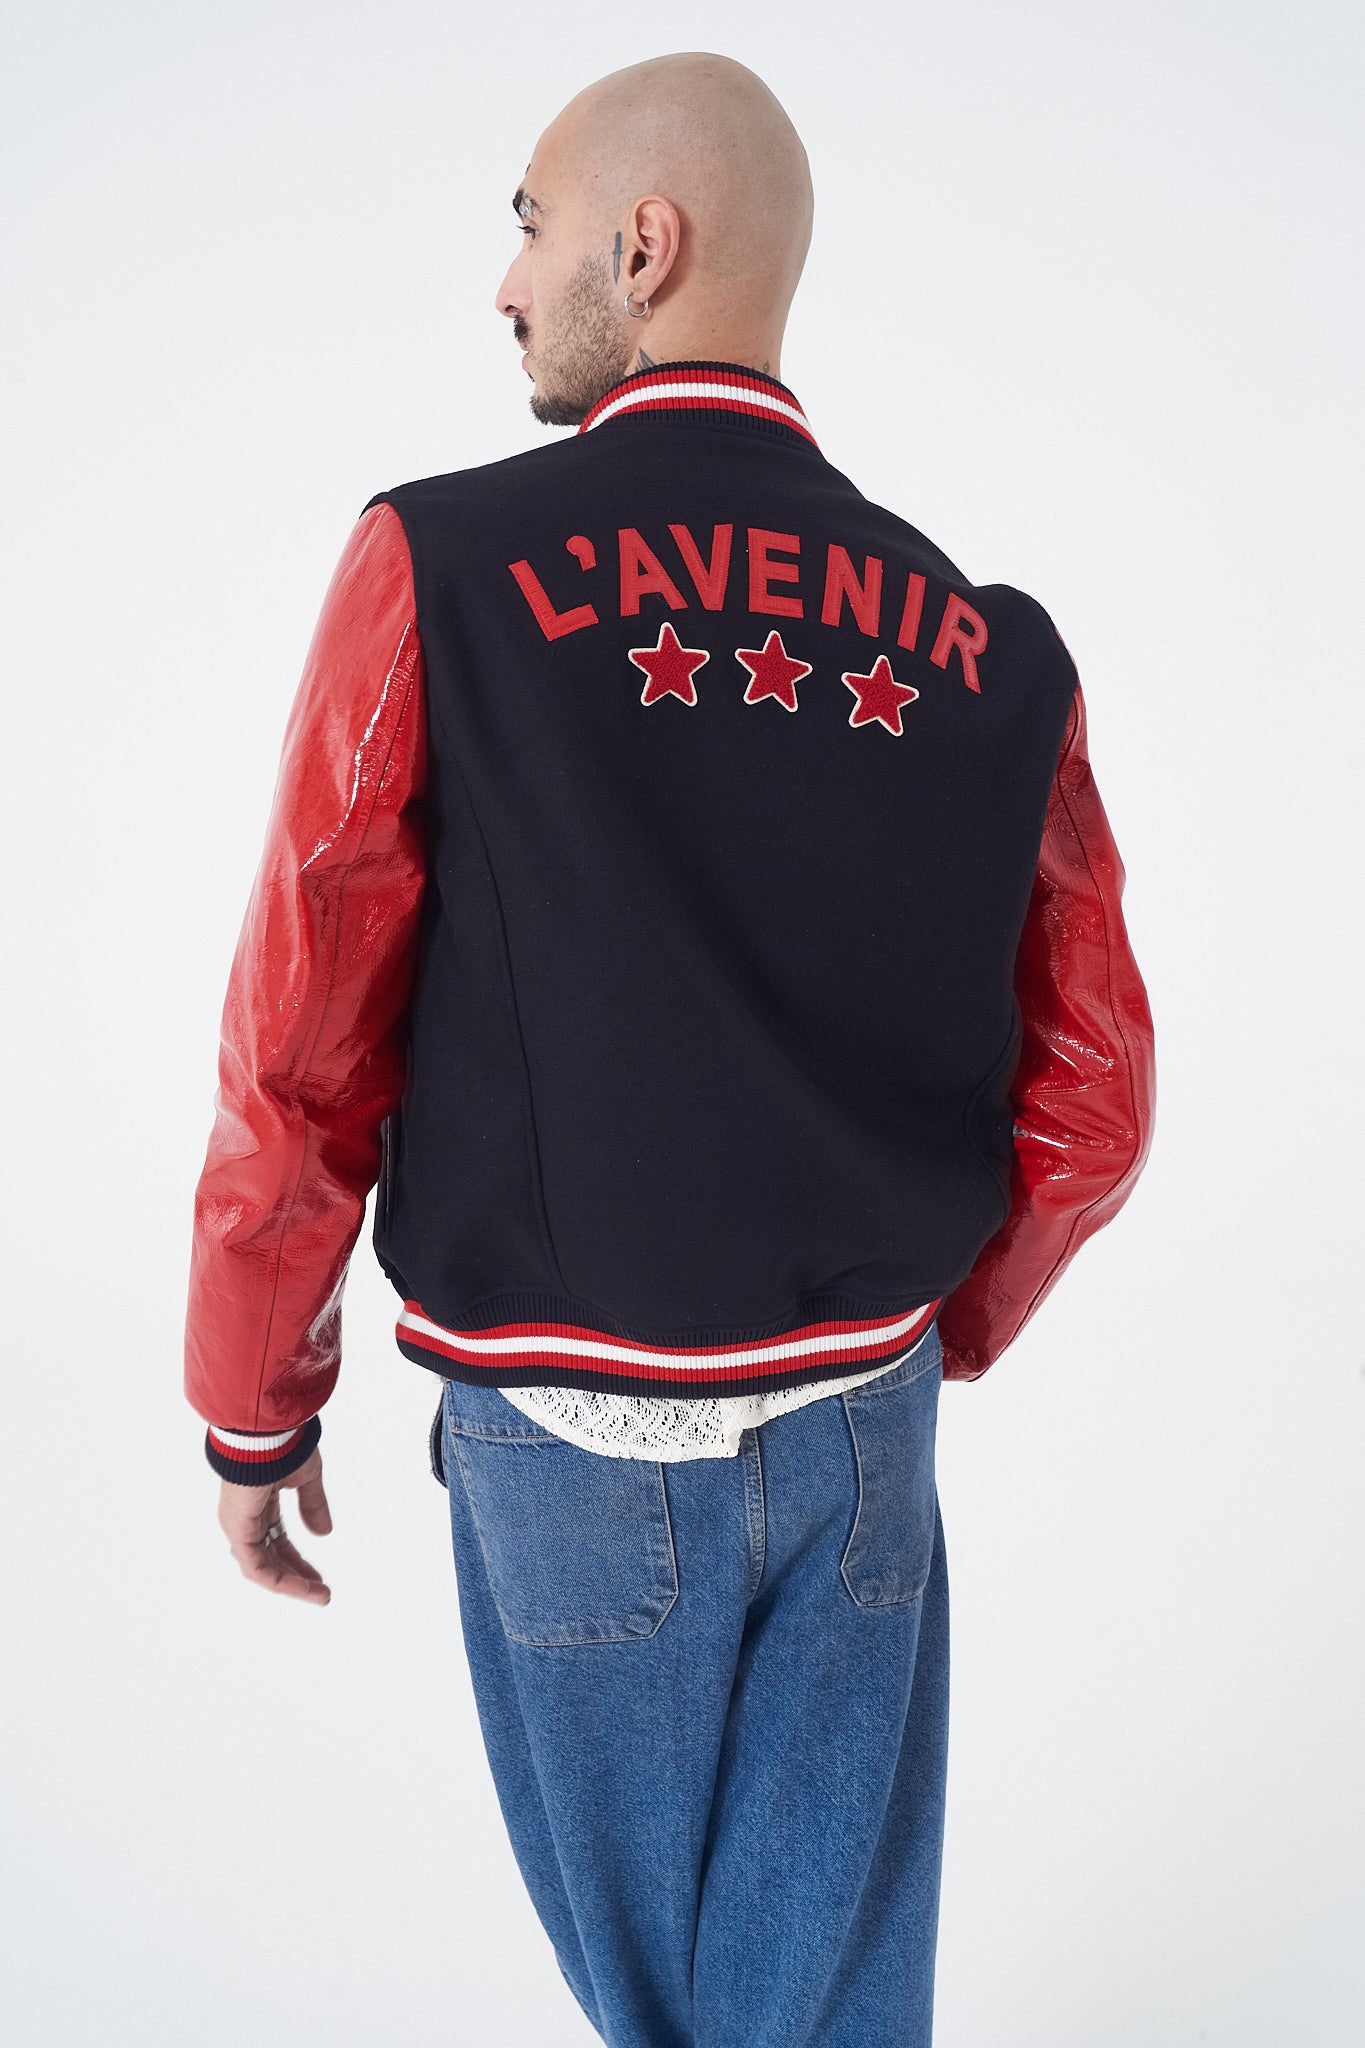 Raydar - Foiled Leather Varsity - Red & Black